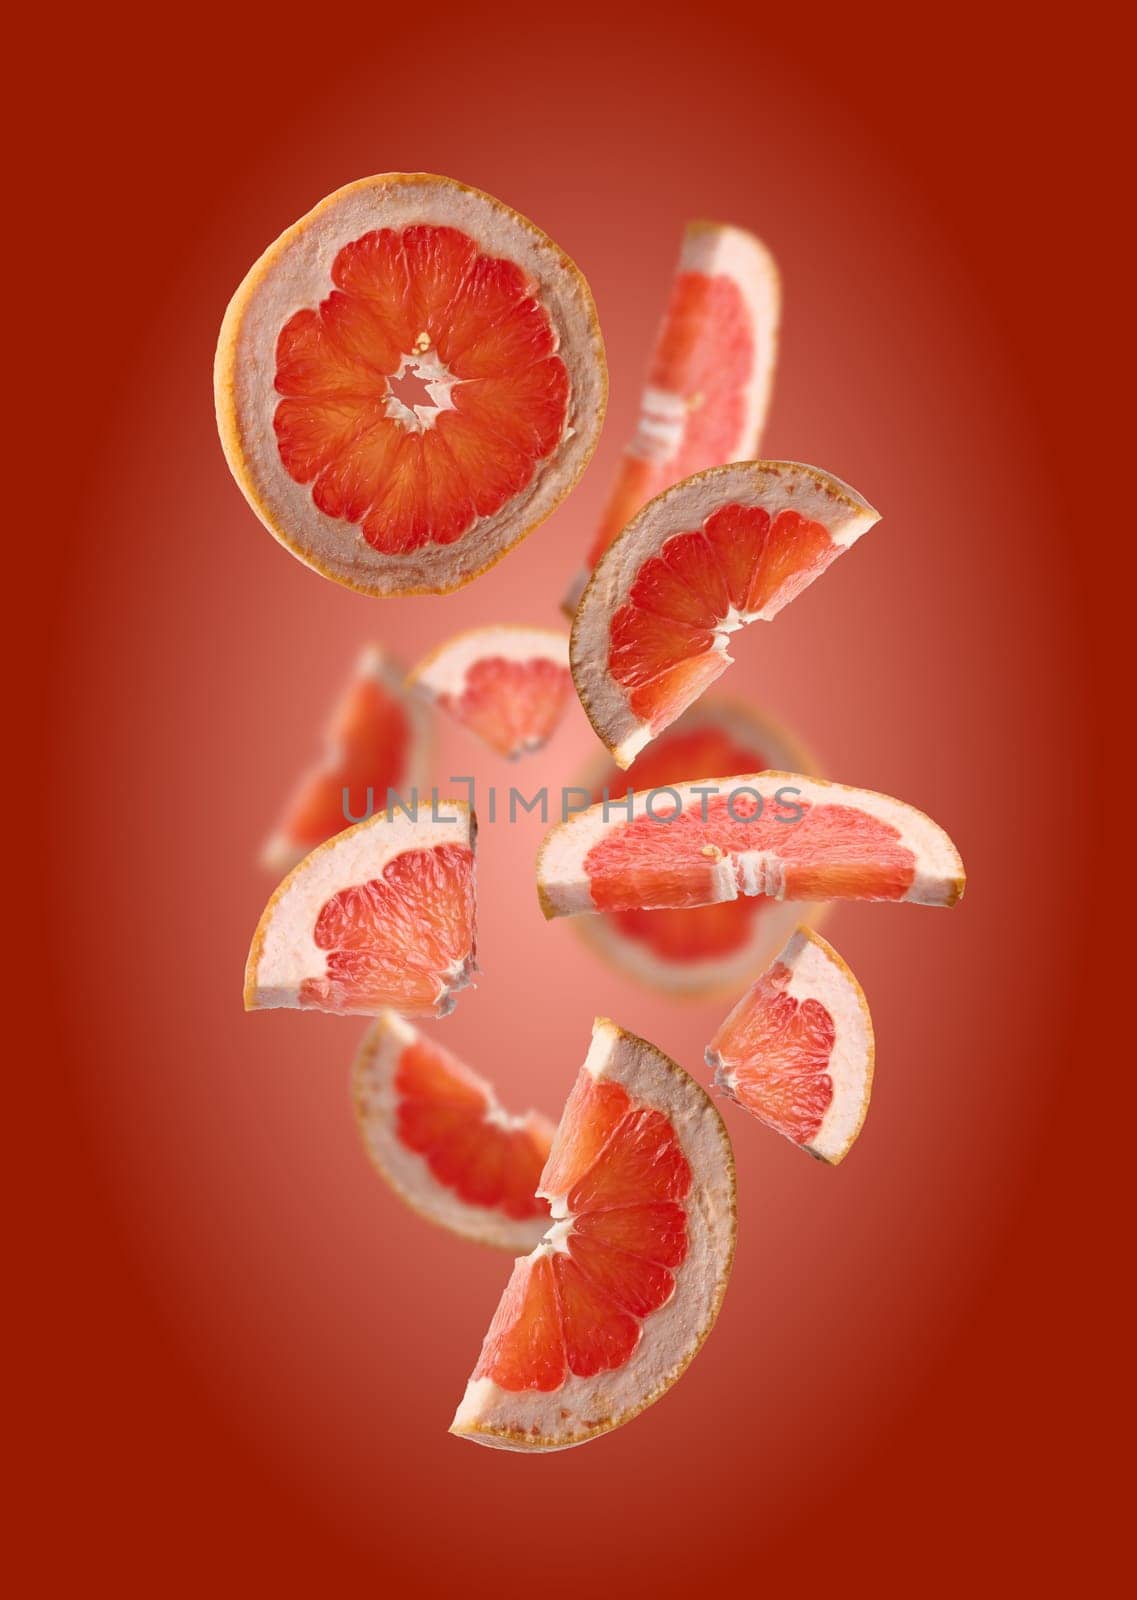 Various pieces of ripe grapefruit on a red background, fruit slices levitate